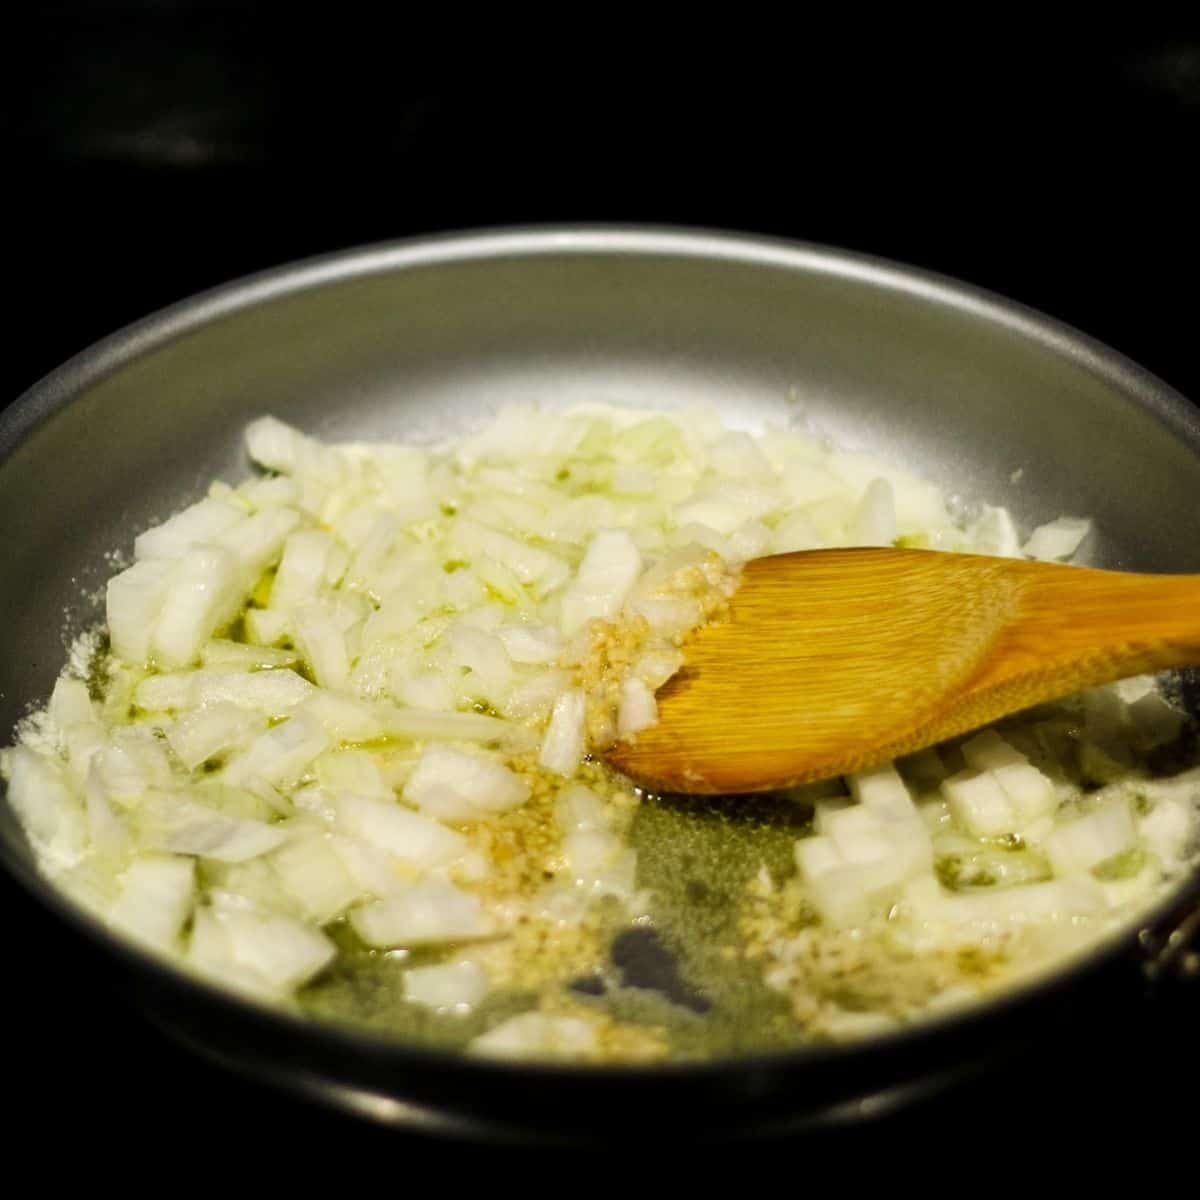 Cooking onion and garlic in melted butter.